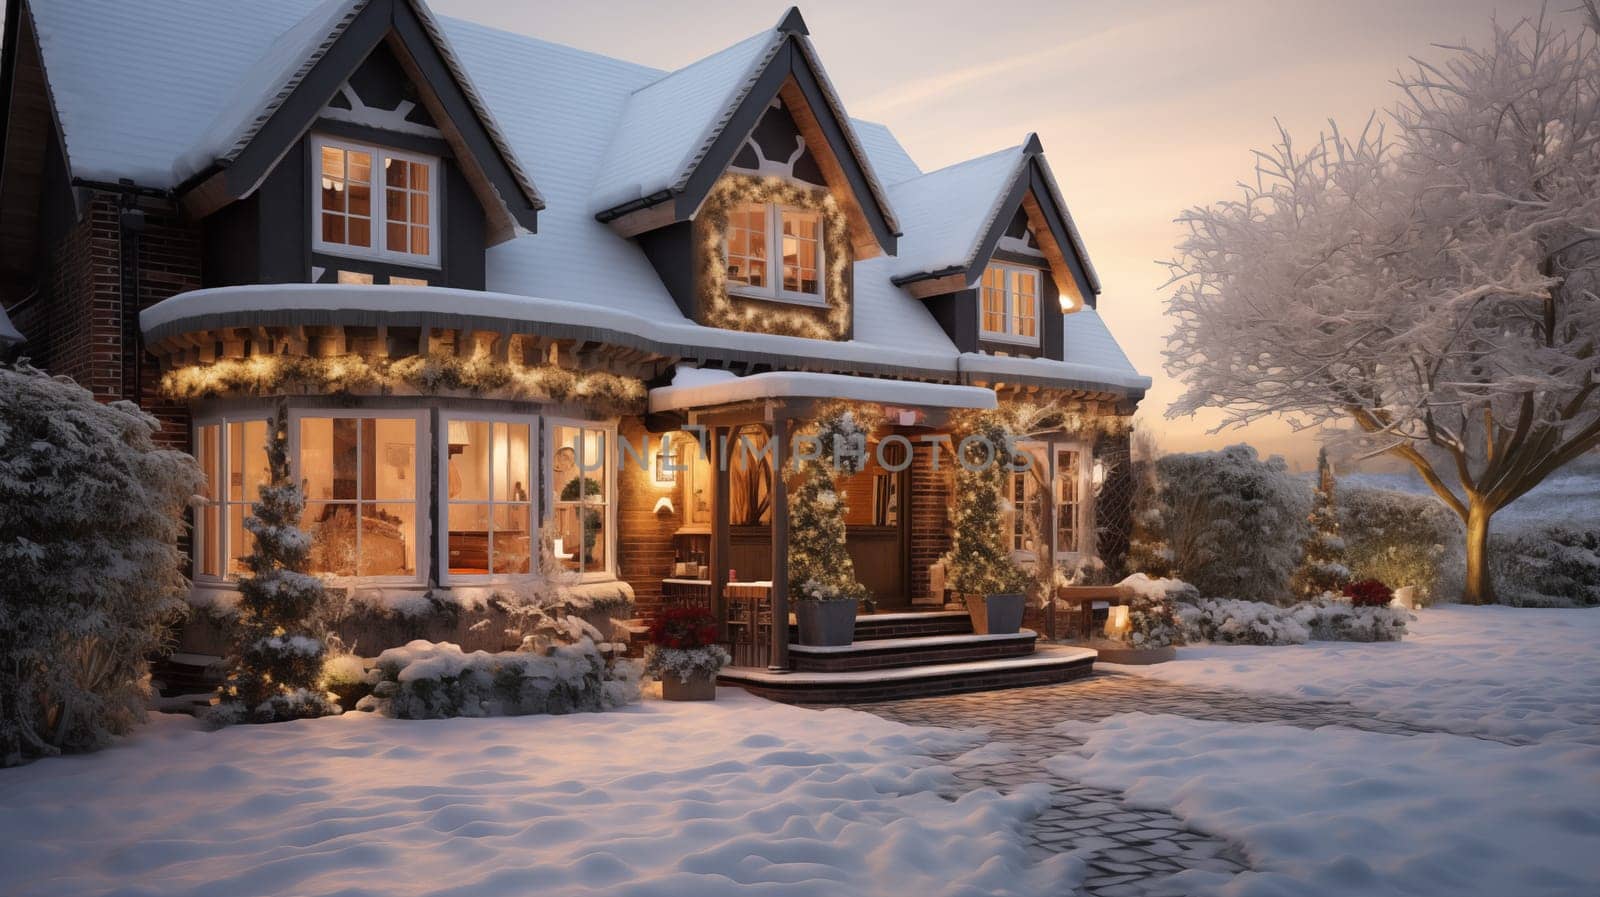 An illustration of a beautiful snow-covered country house decorated for Christmas.